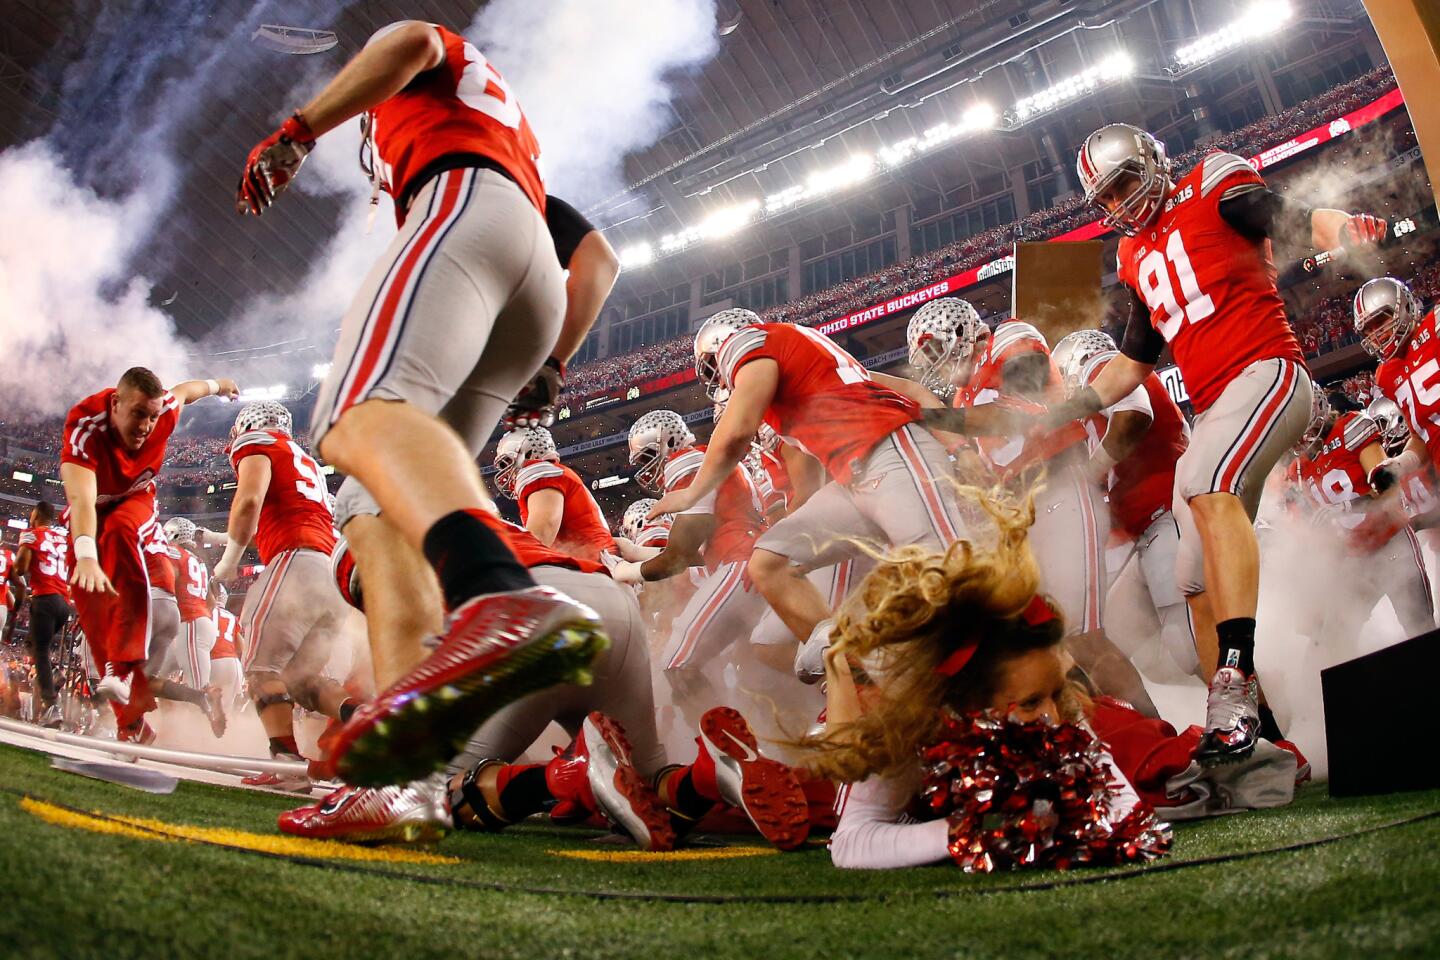 Ohio State players try to avoid running over cheerleader Ally Nelson, who fell in front of them before the College Football Playoff national championship game Monday night at AT&T Stadium.